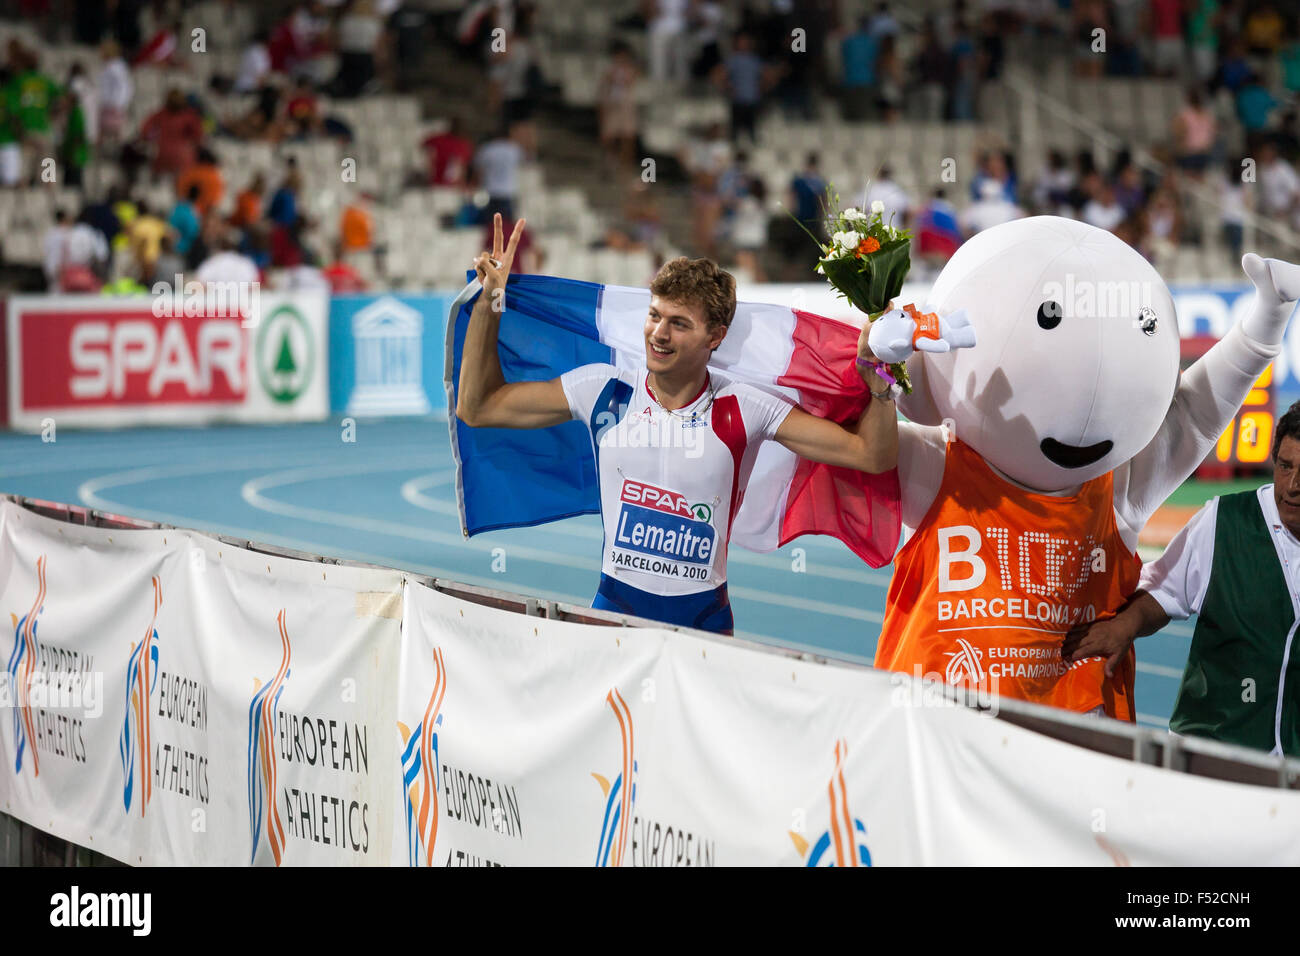 Christophe Lemaitre after the win (100m) in Barcelona 2010 European Championships Stock Photo